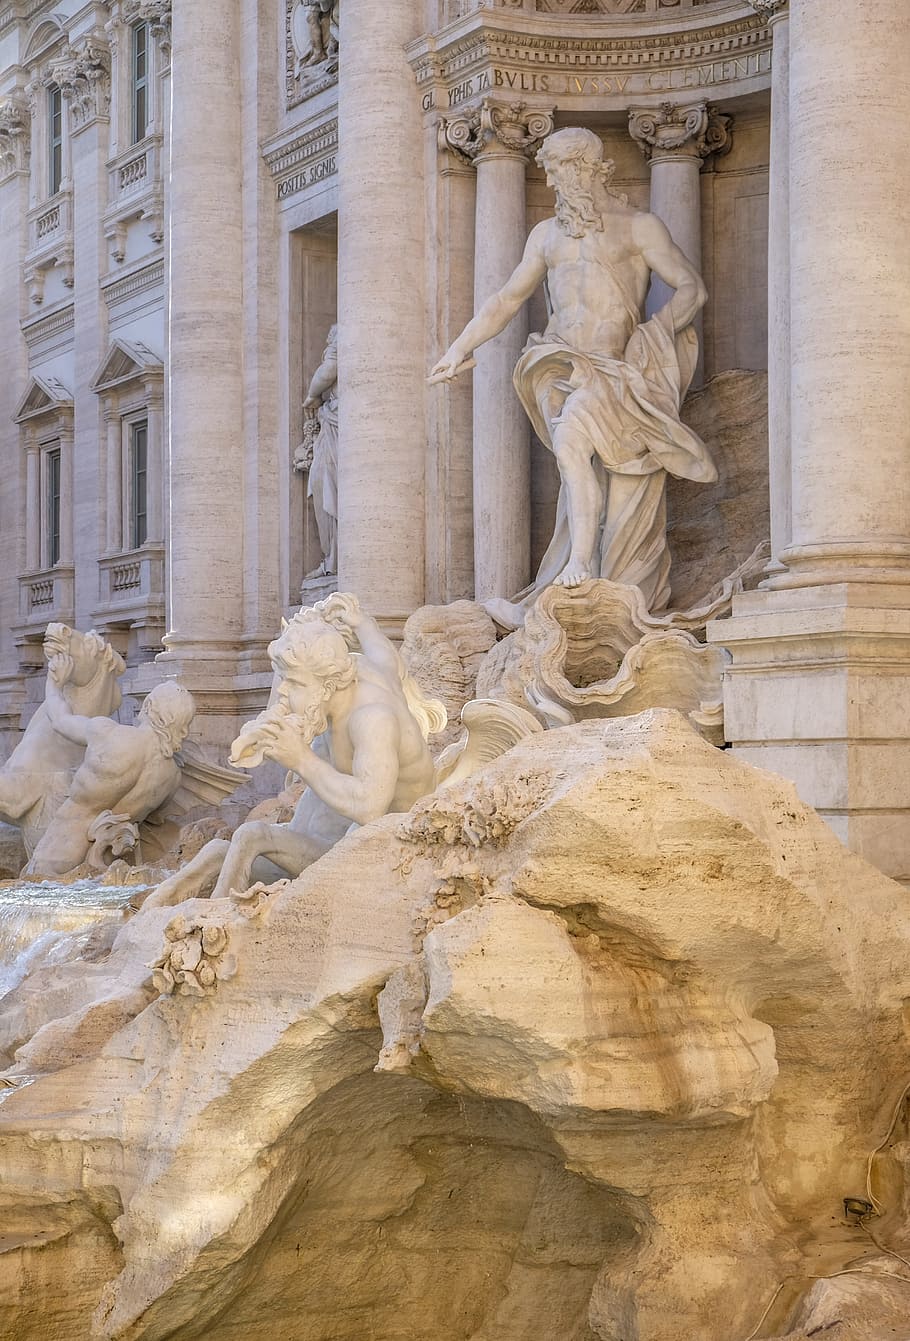 trevi fountain, fountain, rome, art, attractions include, monument, italy, marble, architecture, art and craft